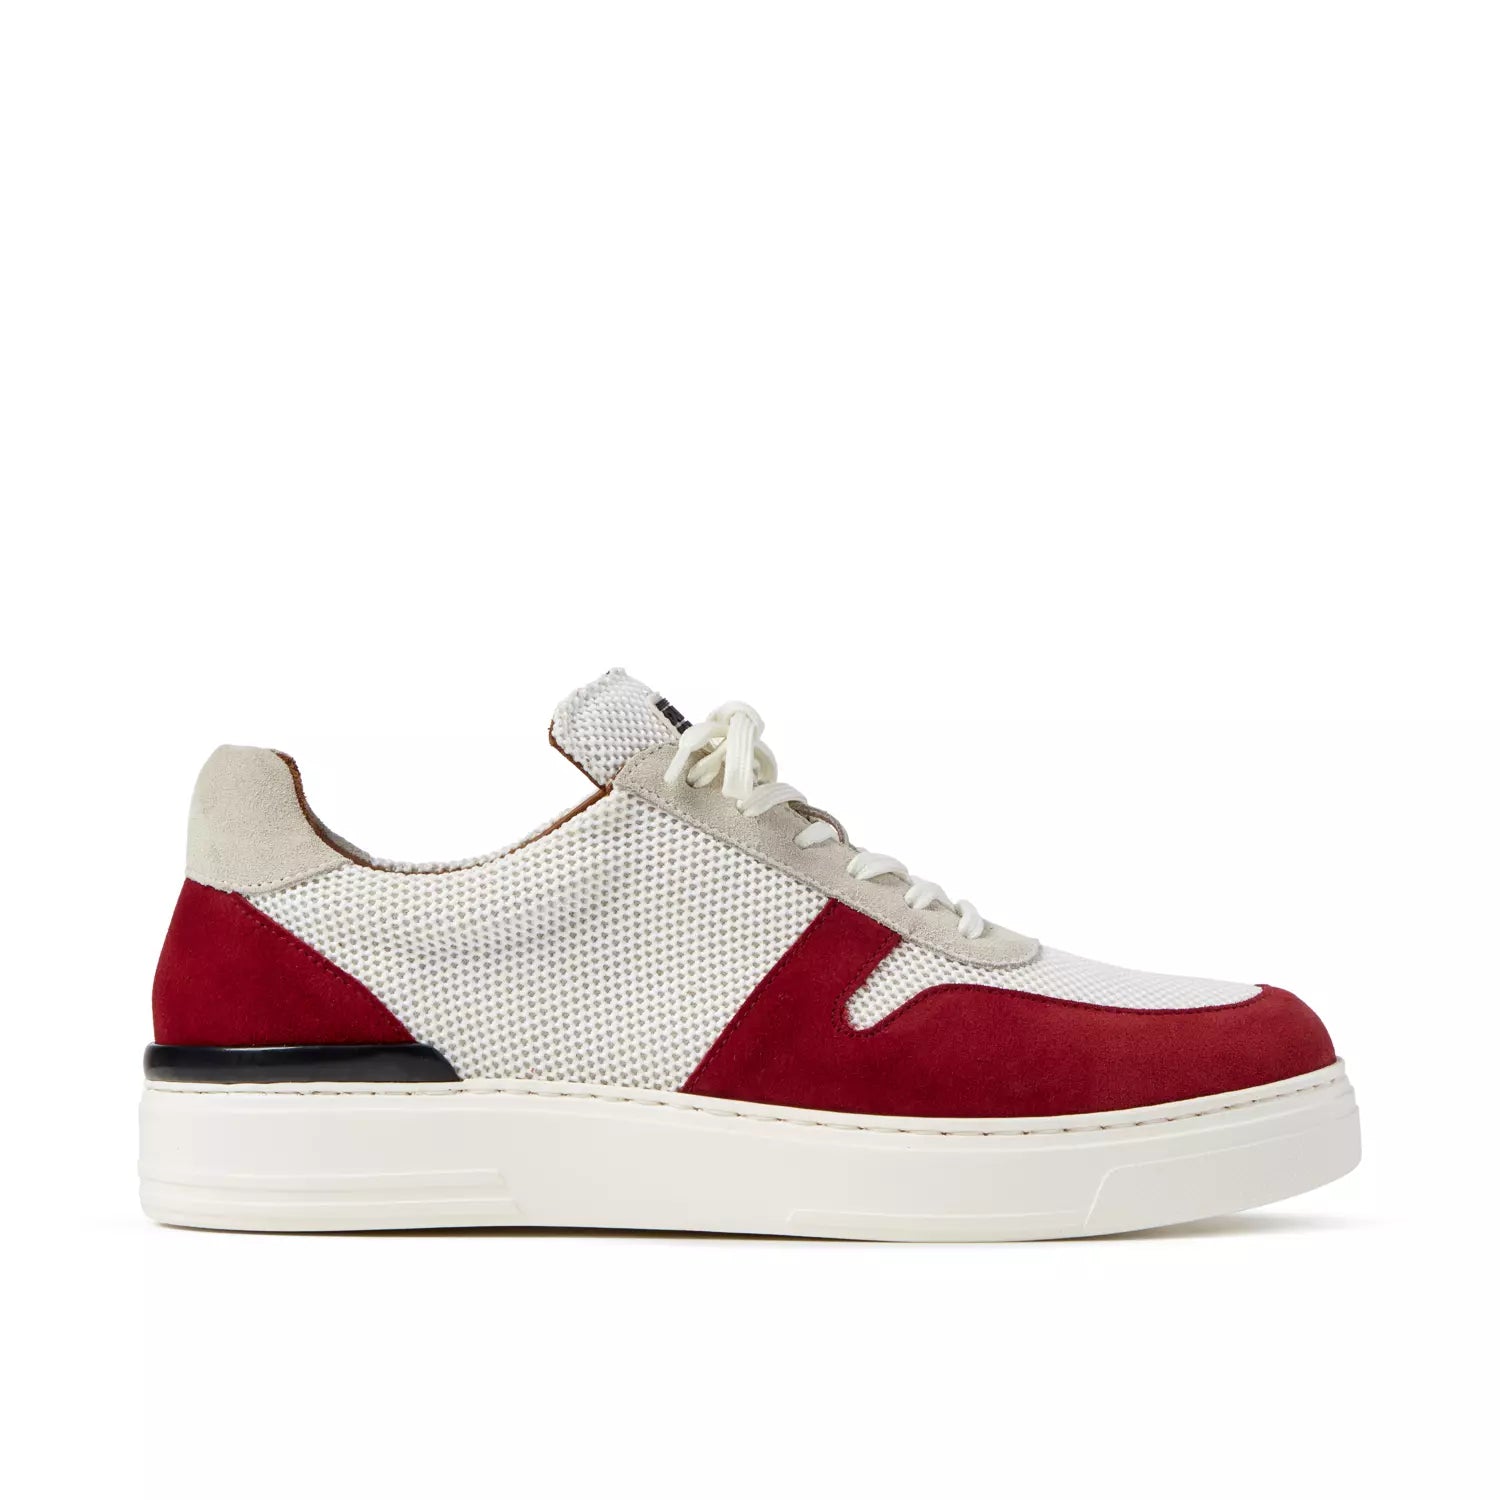 Duke and Dexter Ritchie Rio sneakers for men extra light comfortable White and Burgundy side view